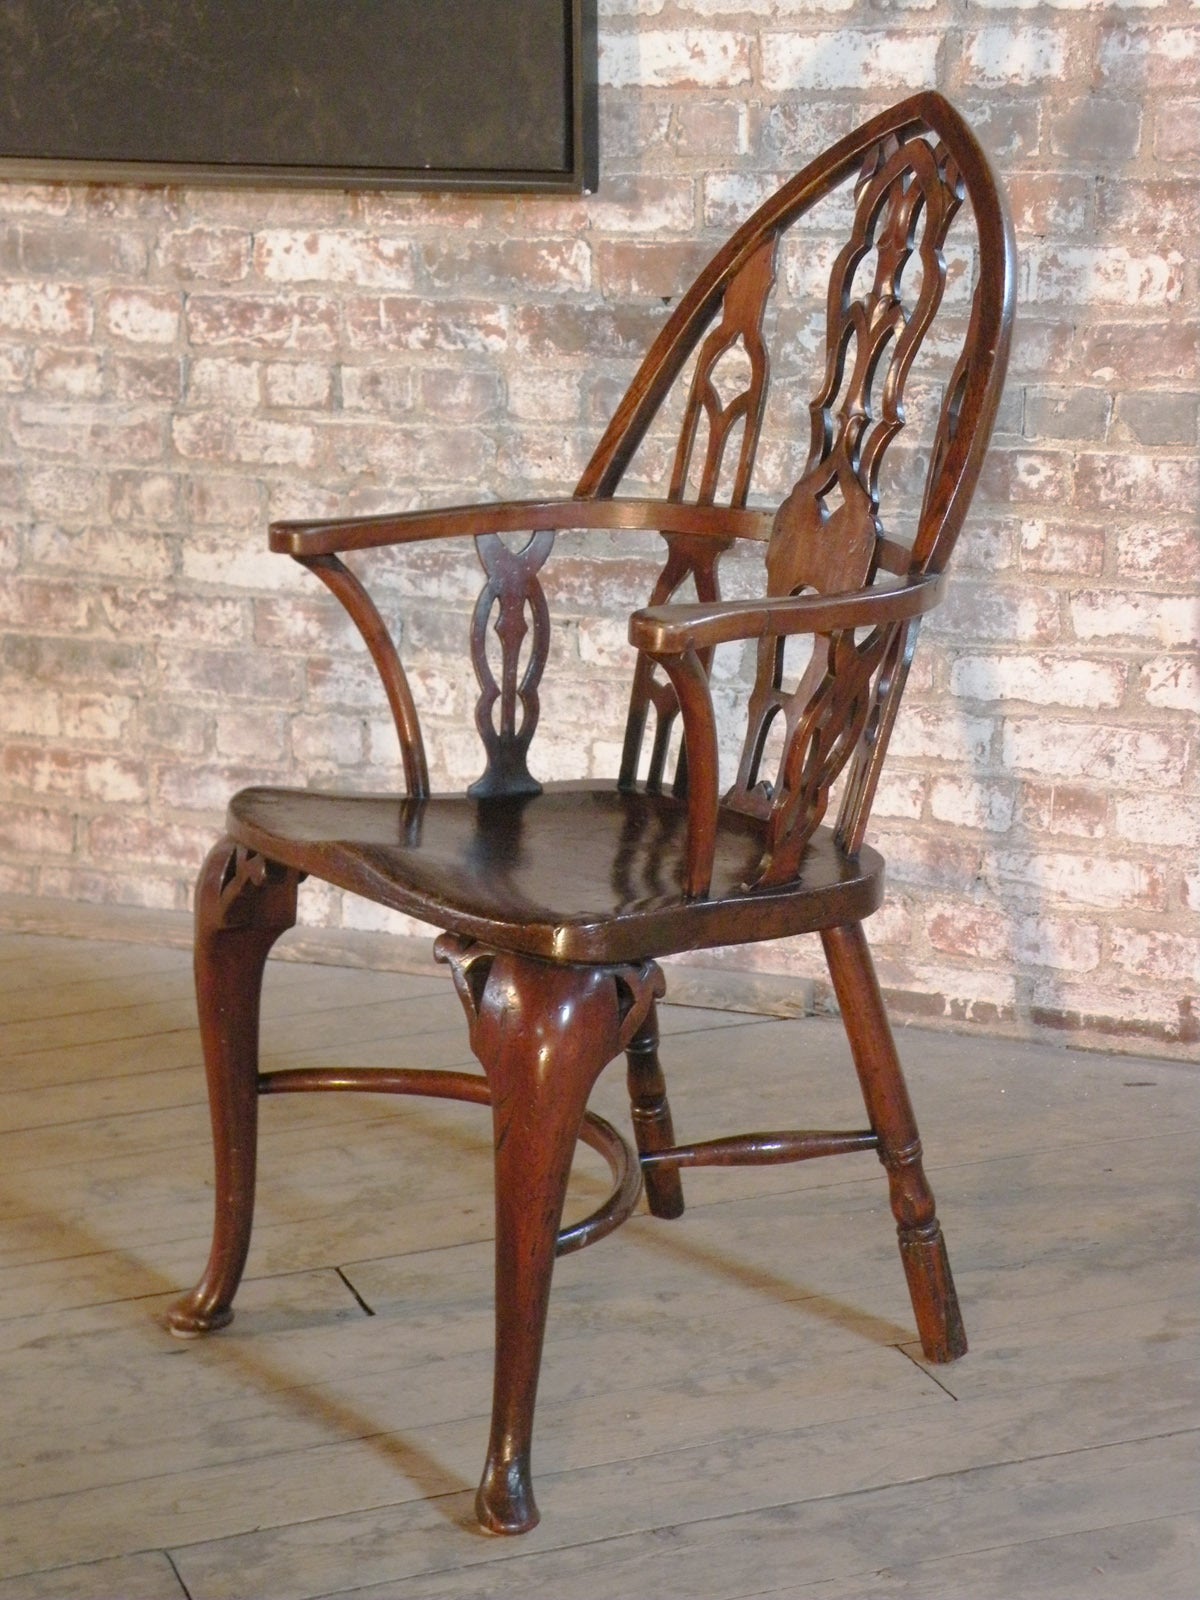 Decorative, rare Yew Wood and Elm Windsor chair, probably made in the Thames Valley, at the end of the 18th century, George III style, with exceptional color and very good condition, commensurate with age and use.

Eighteenth century chairs with